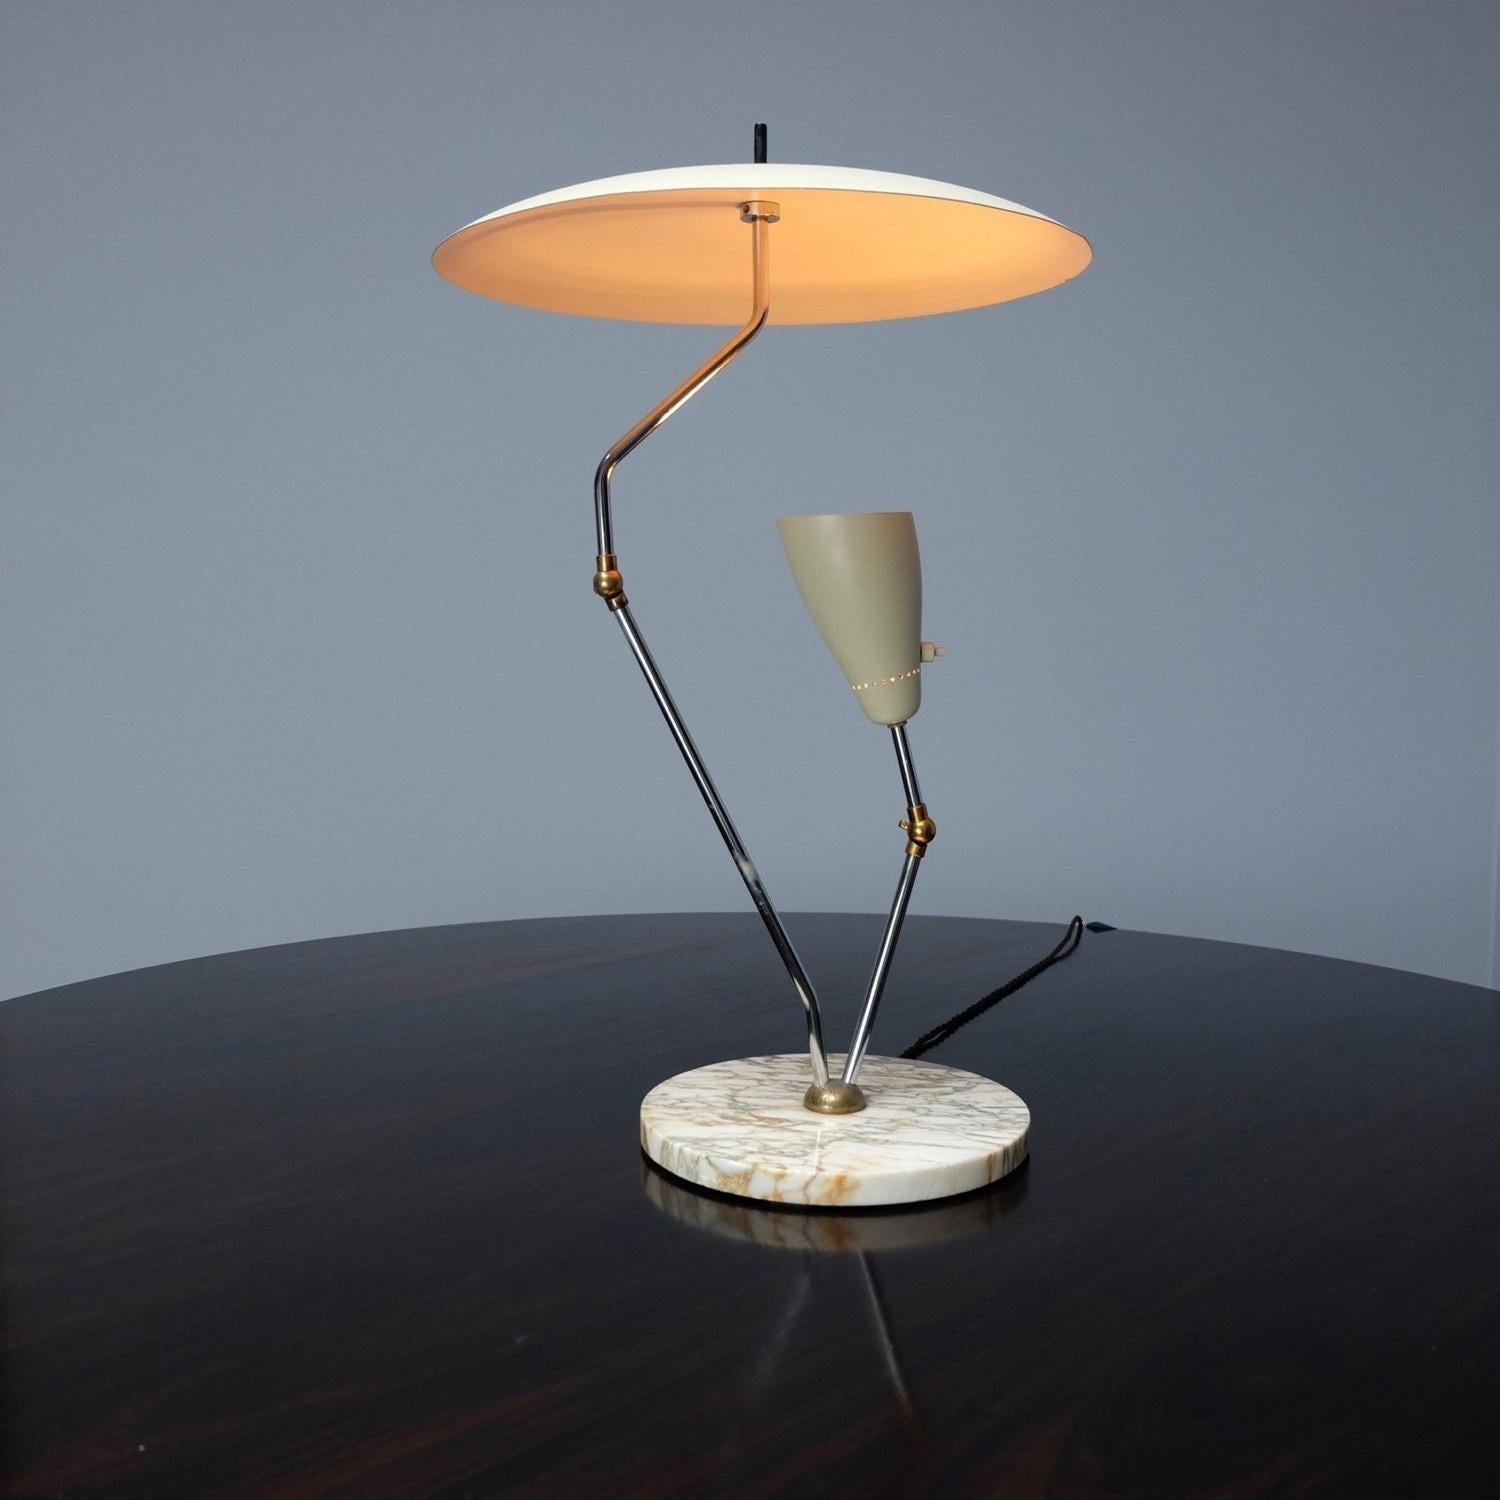 A stunning and incredibly stylish 1950s Italian reflector desk lamp with a metal reflector shade on a circular marble base. The desk lamp is in the style of Stilnovo or Gino Sarfatti. The small beige adjustable beige shade lights up the inner canopy